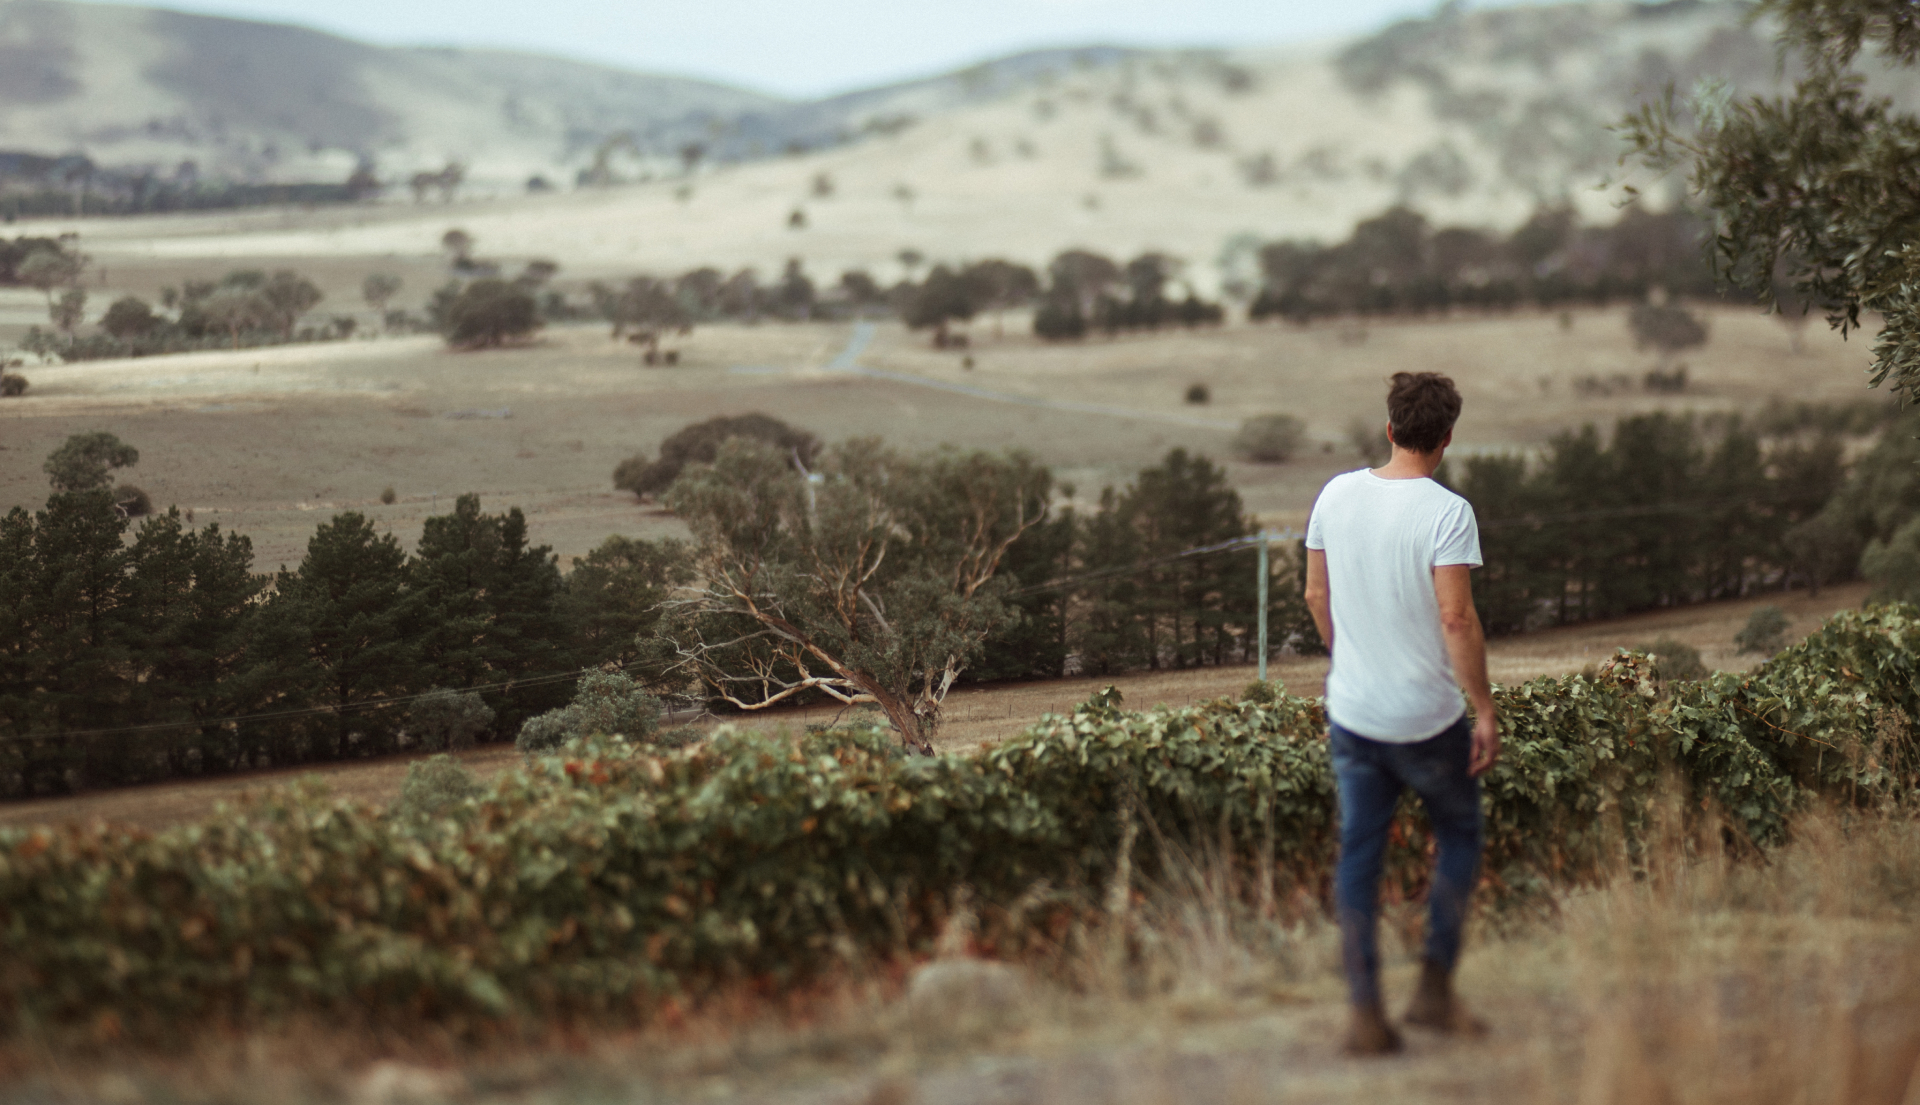 Winemaker in white tshirt and jeans walking through vineyard, hills in the distance.